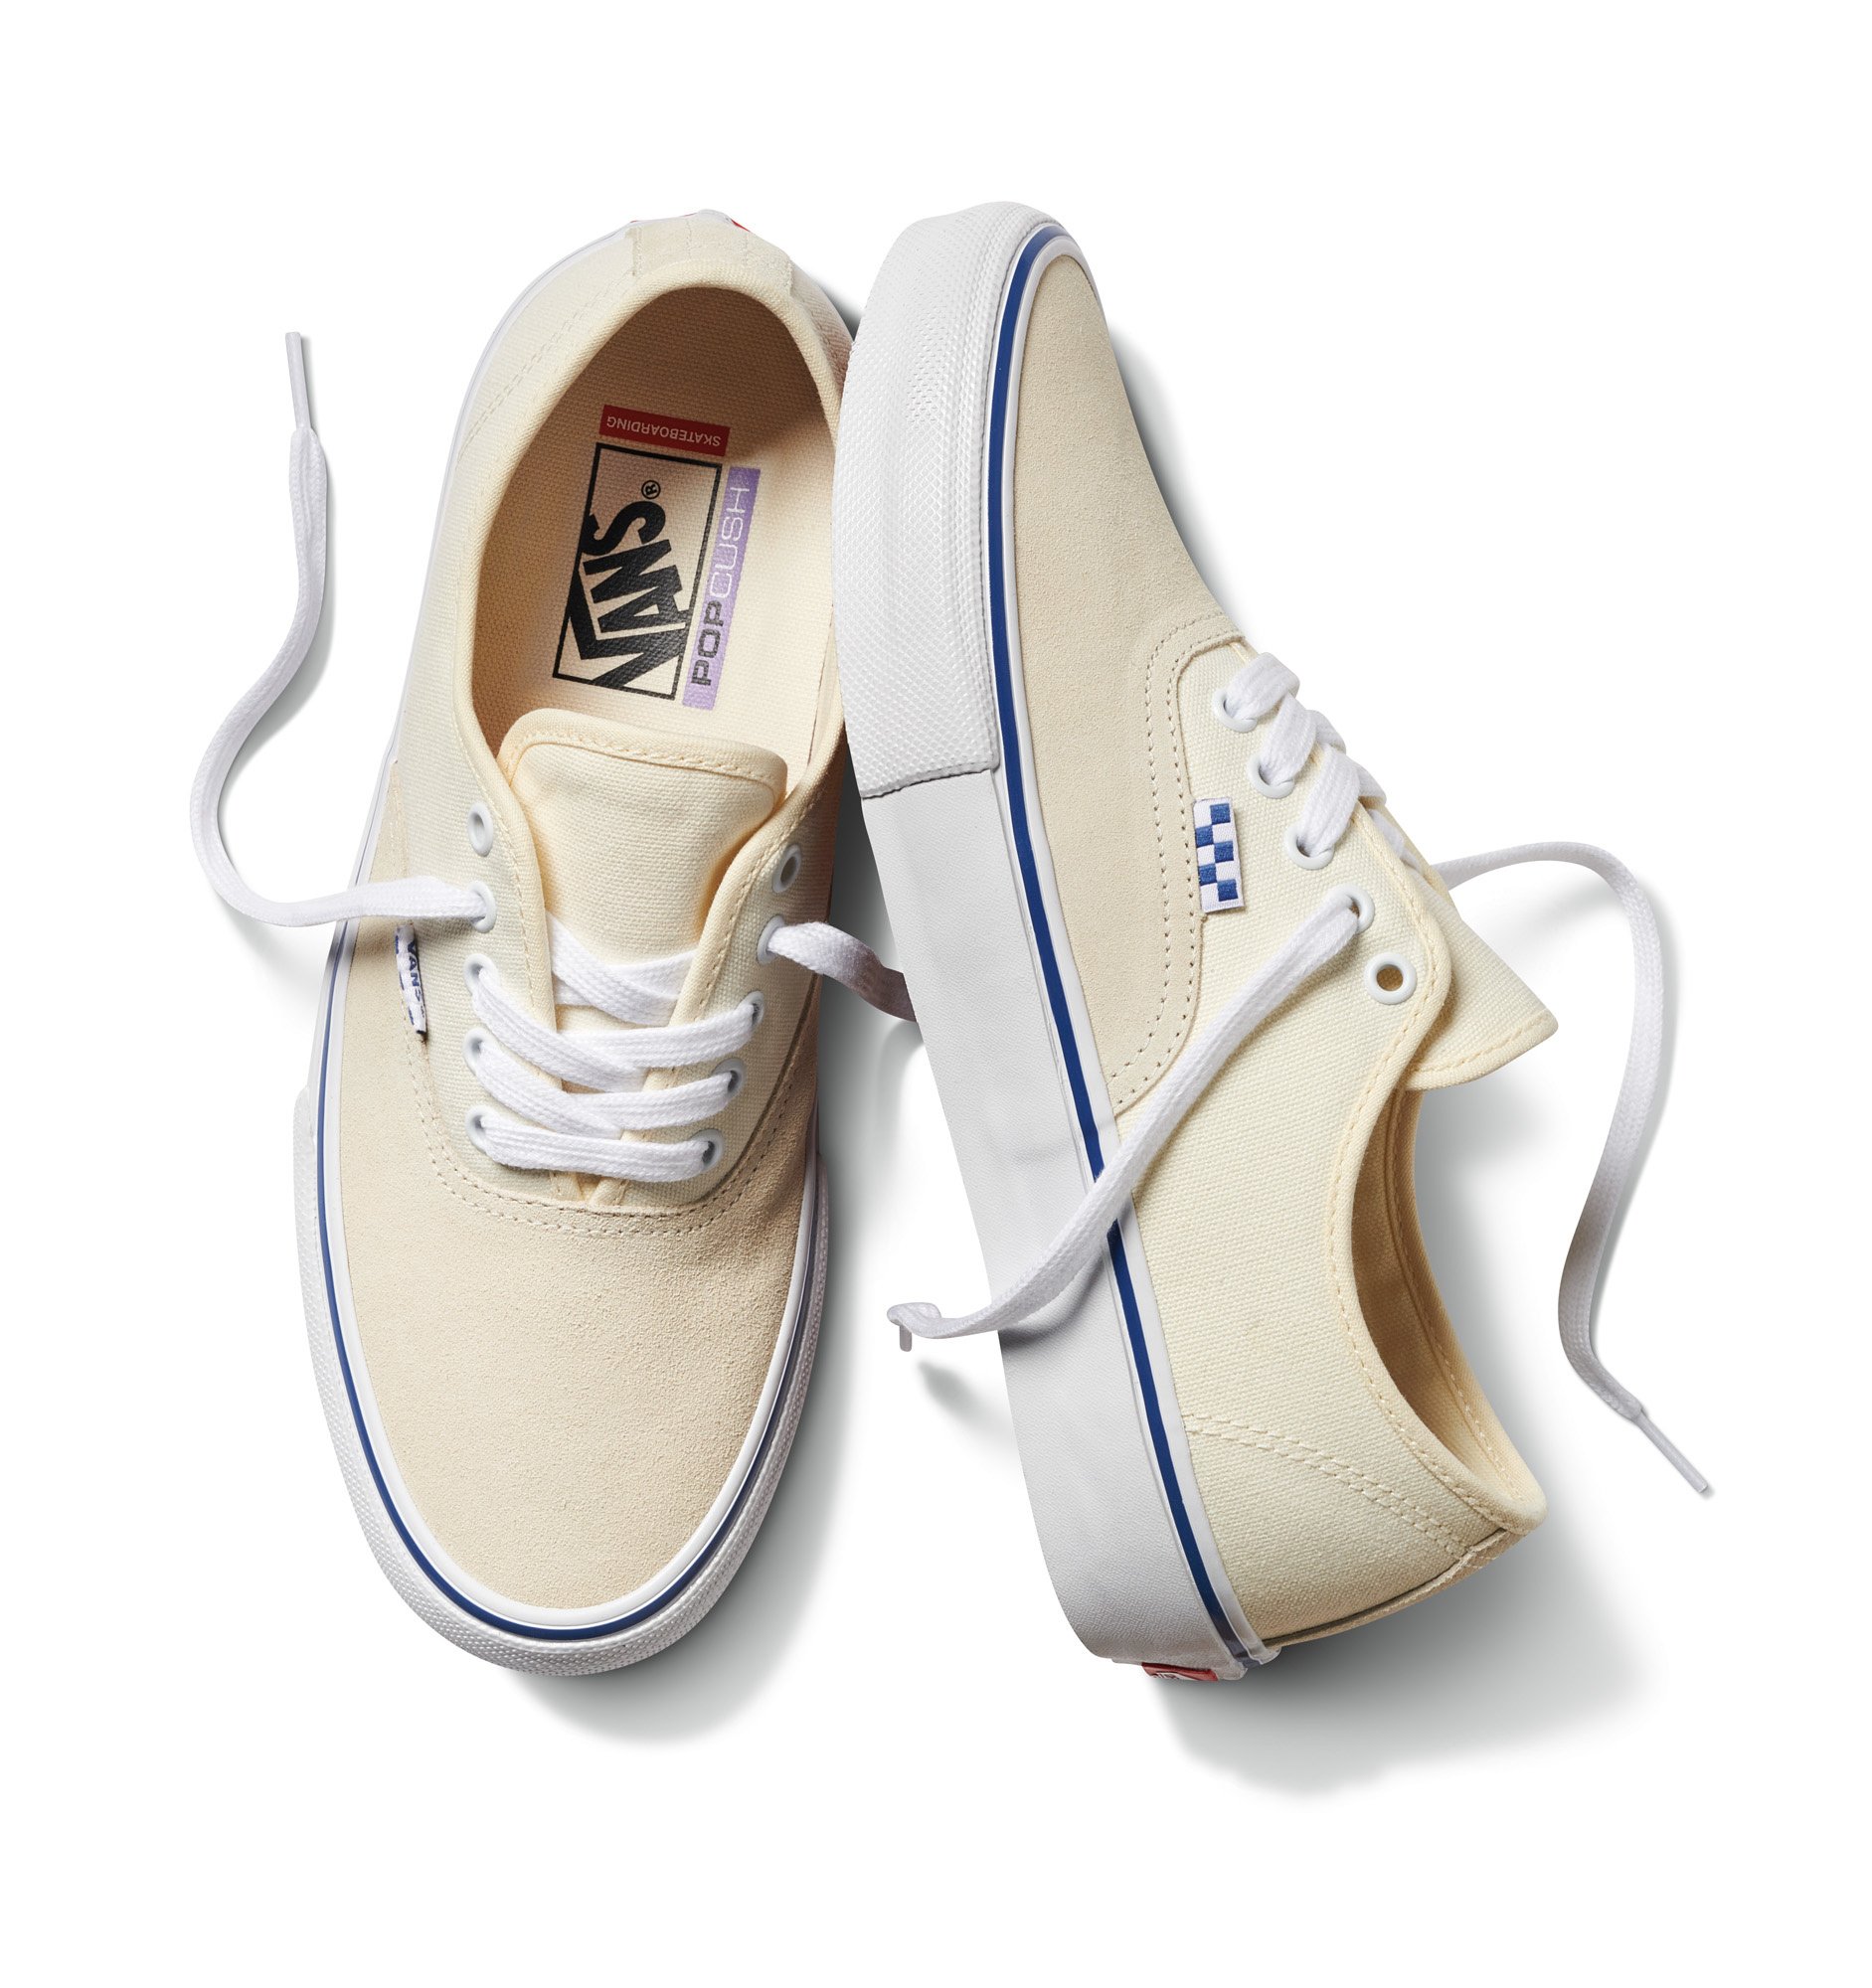 NEW Vans Skate Classics Collection 